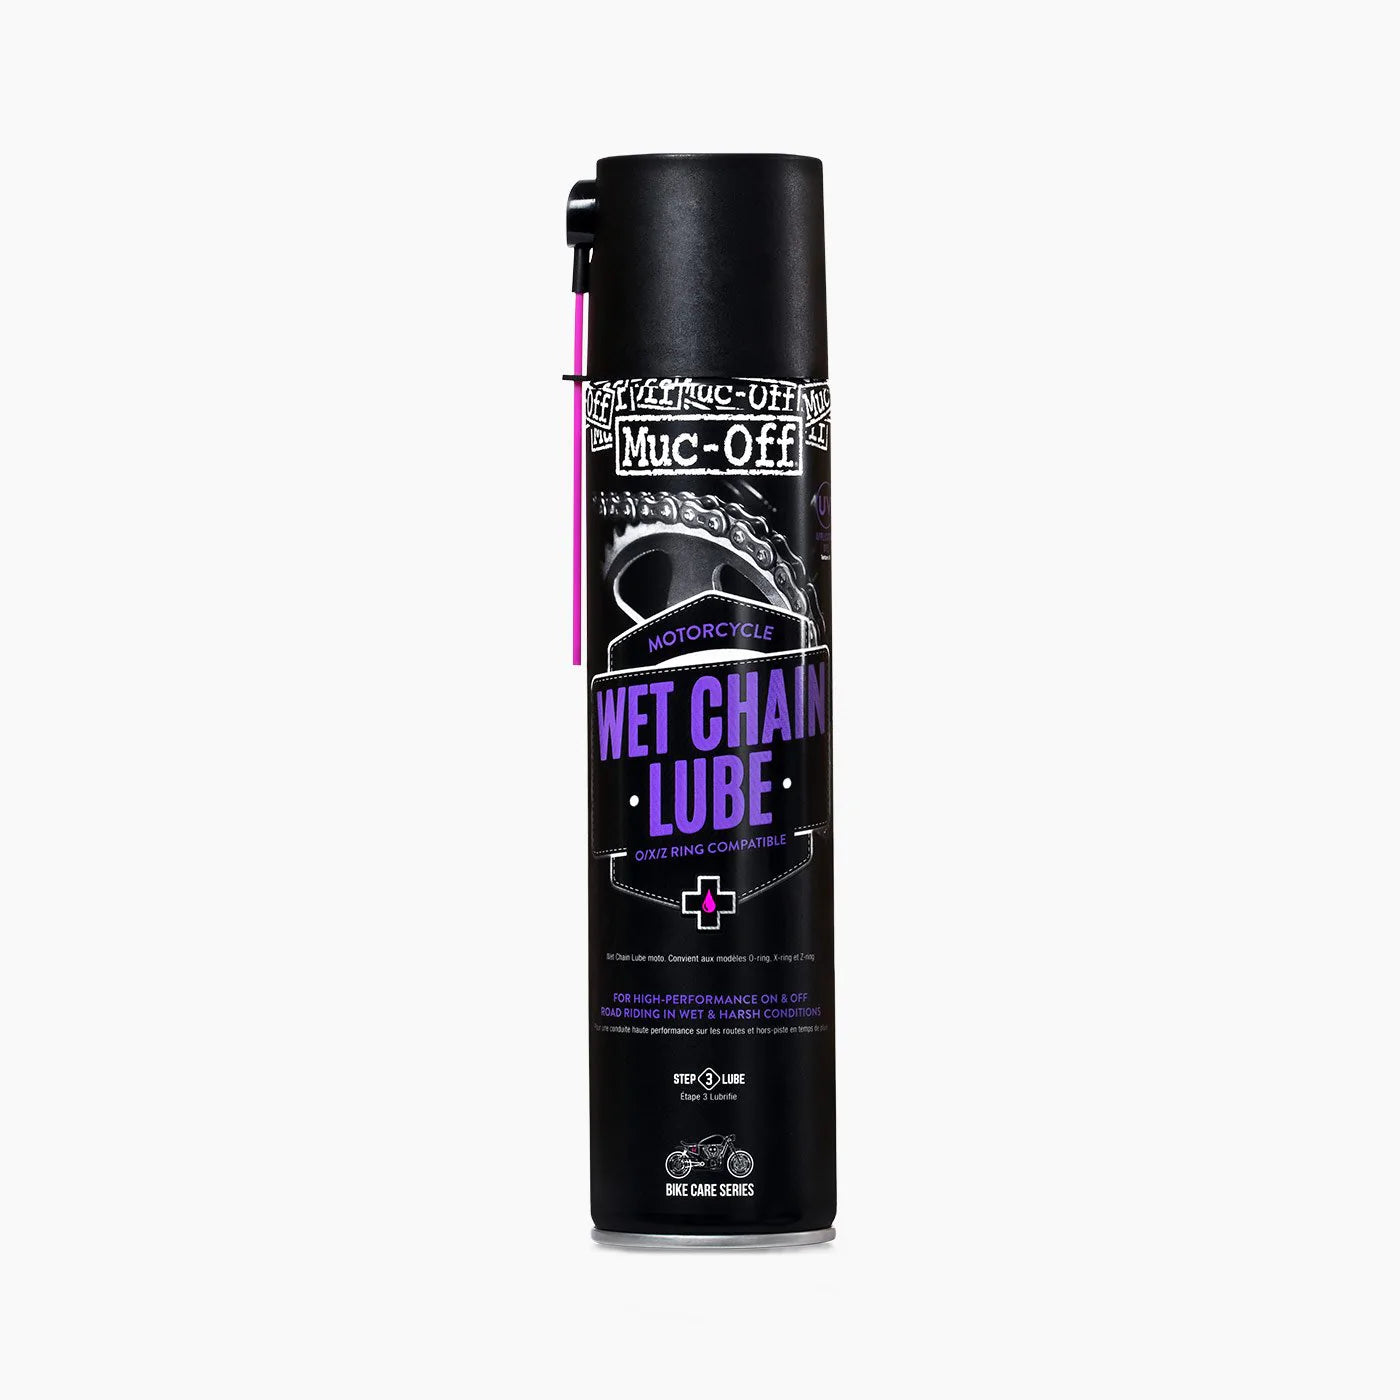 Muc-Off Motorcycle Wet Weather Chain Lube - 400ml